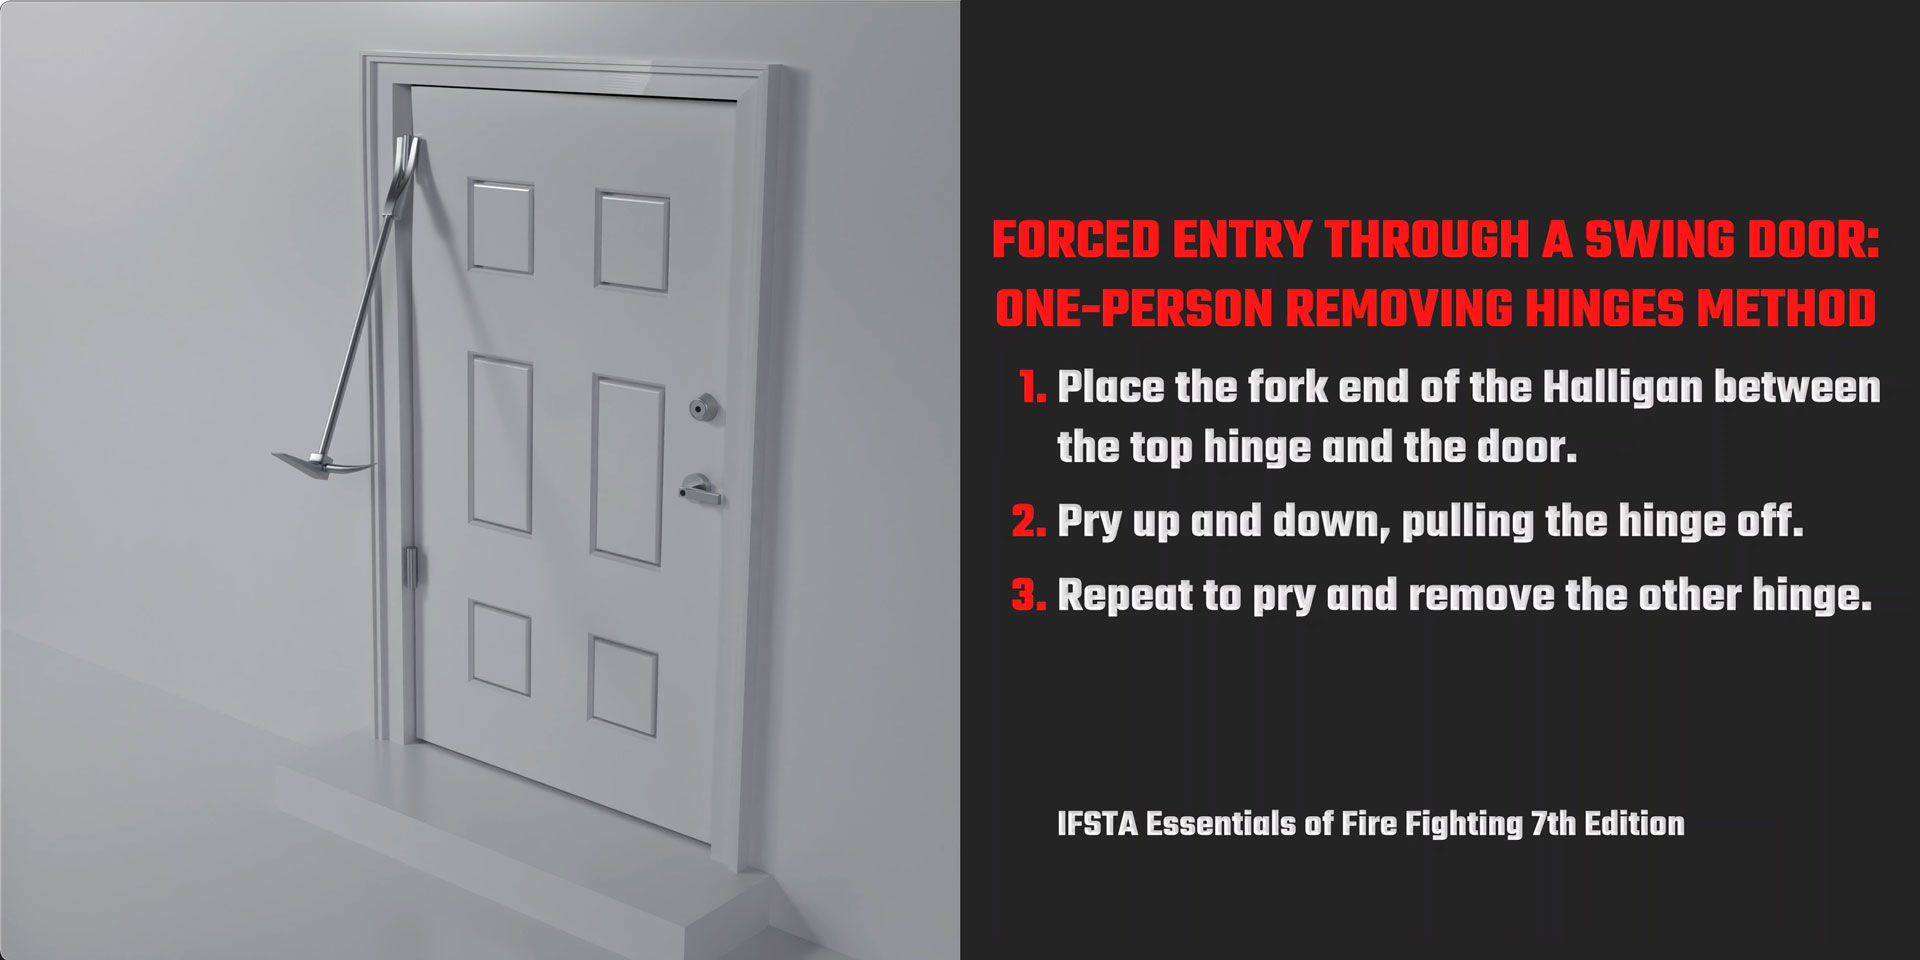 Featured image for “Forced Entry Through Swing Door: Removing Hinges Method”